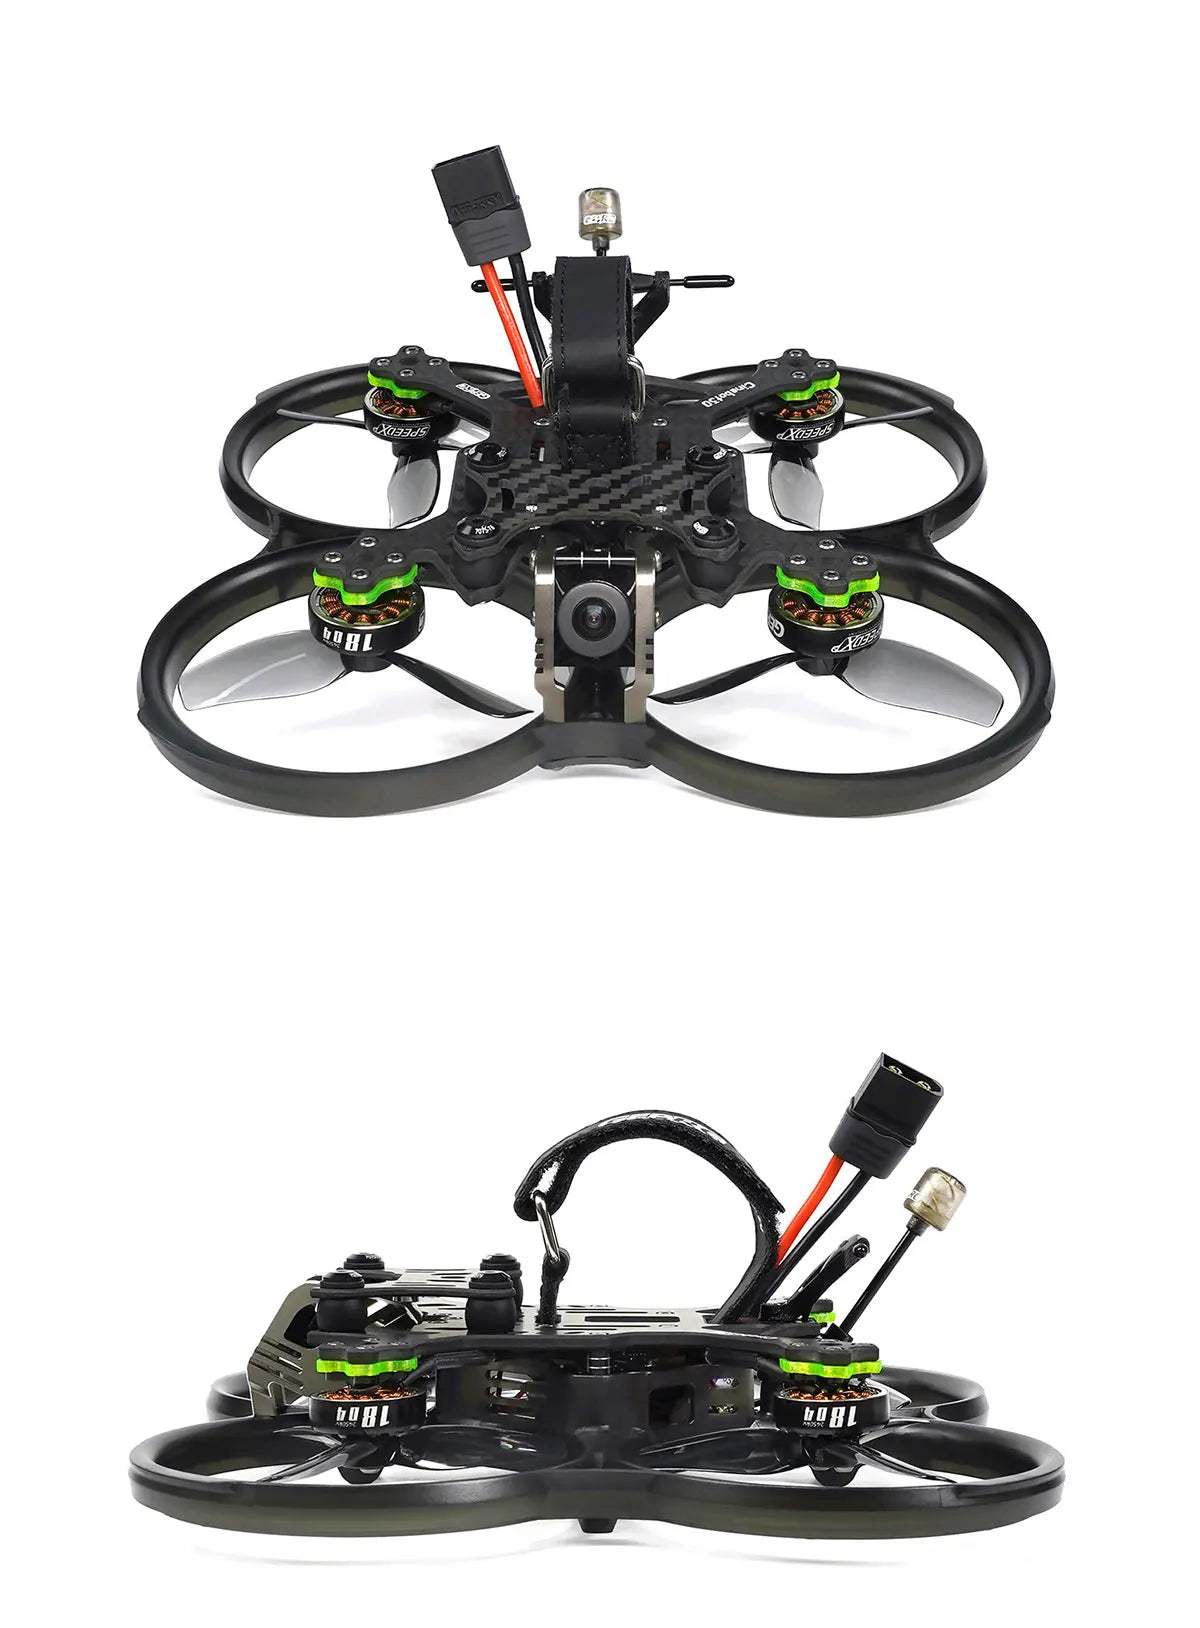 GEPRC Cinebot30 HD, HQ prop T76mm*3 propeller gets lowest noise effect in its class .